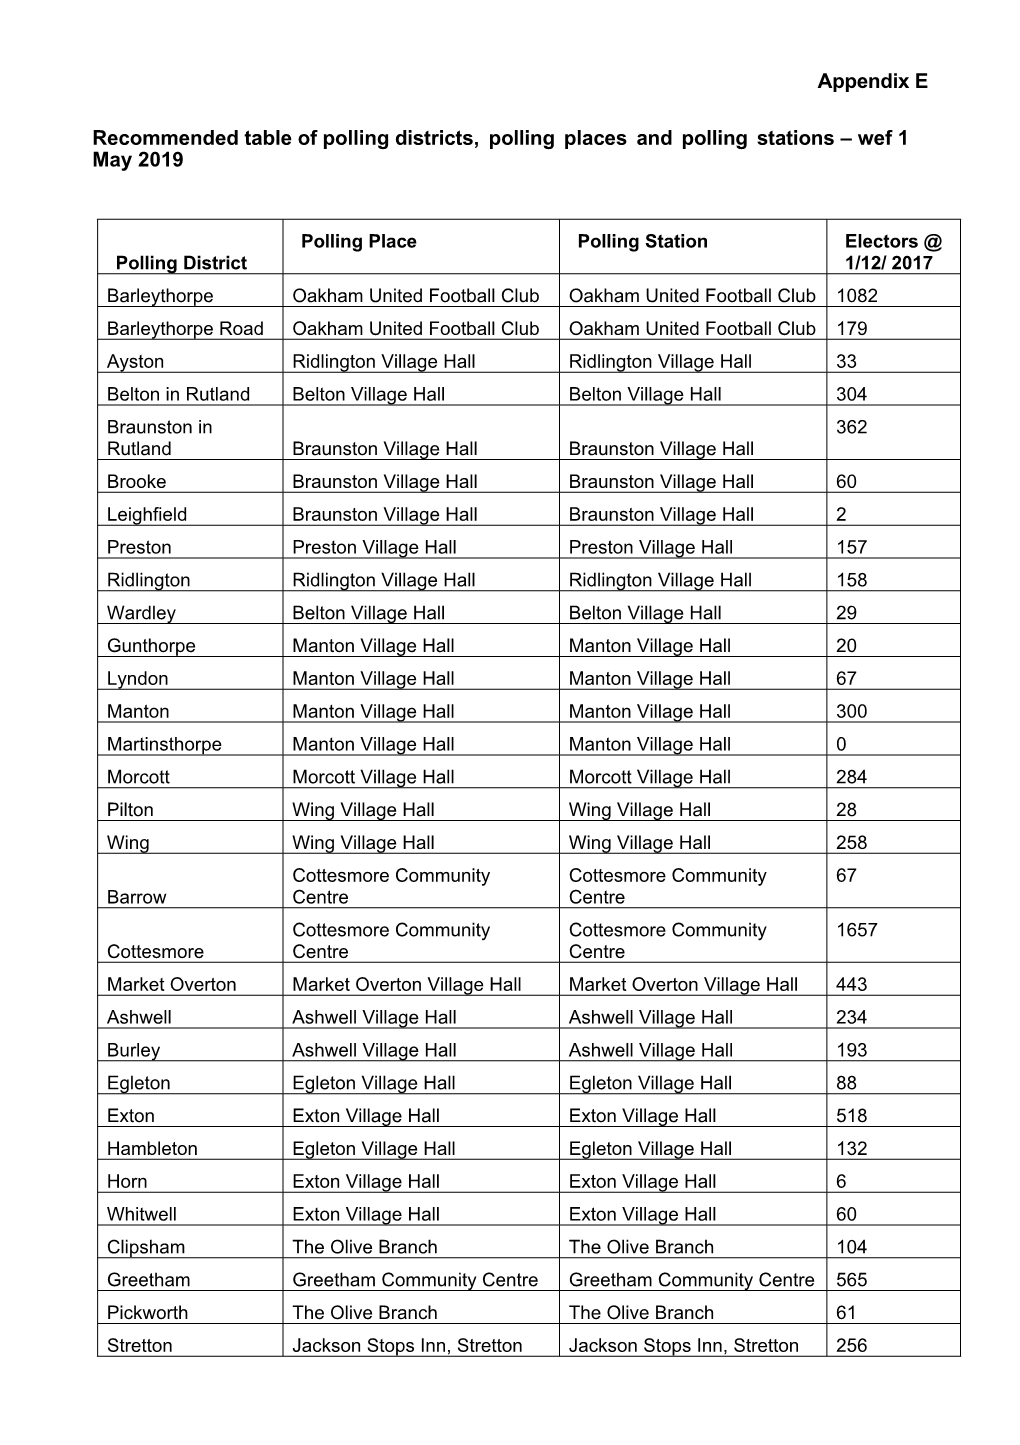 Appendix E Recommended Table of Polling Districts, Polling Places And